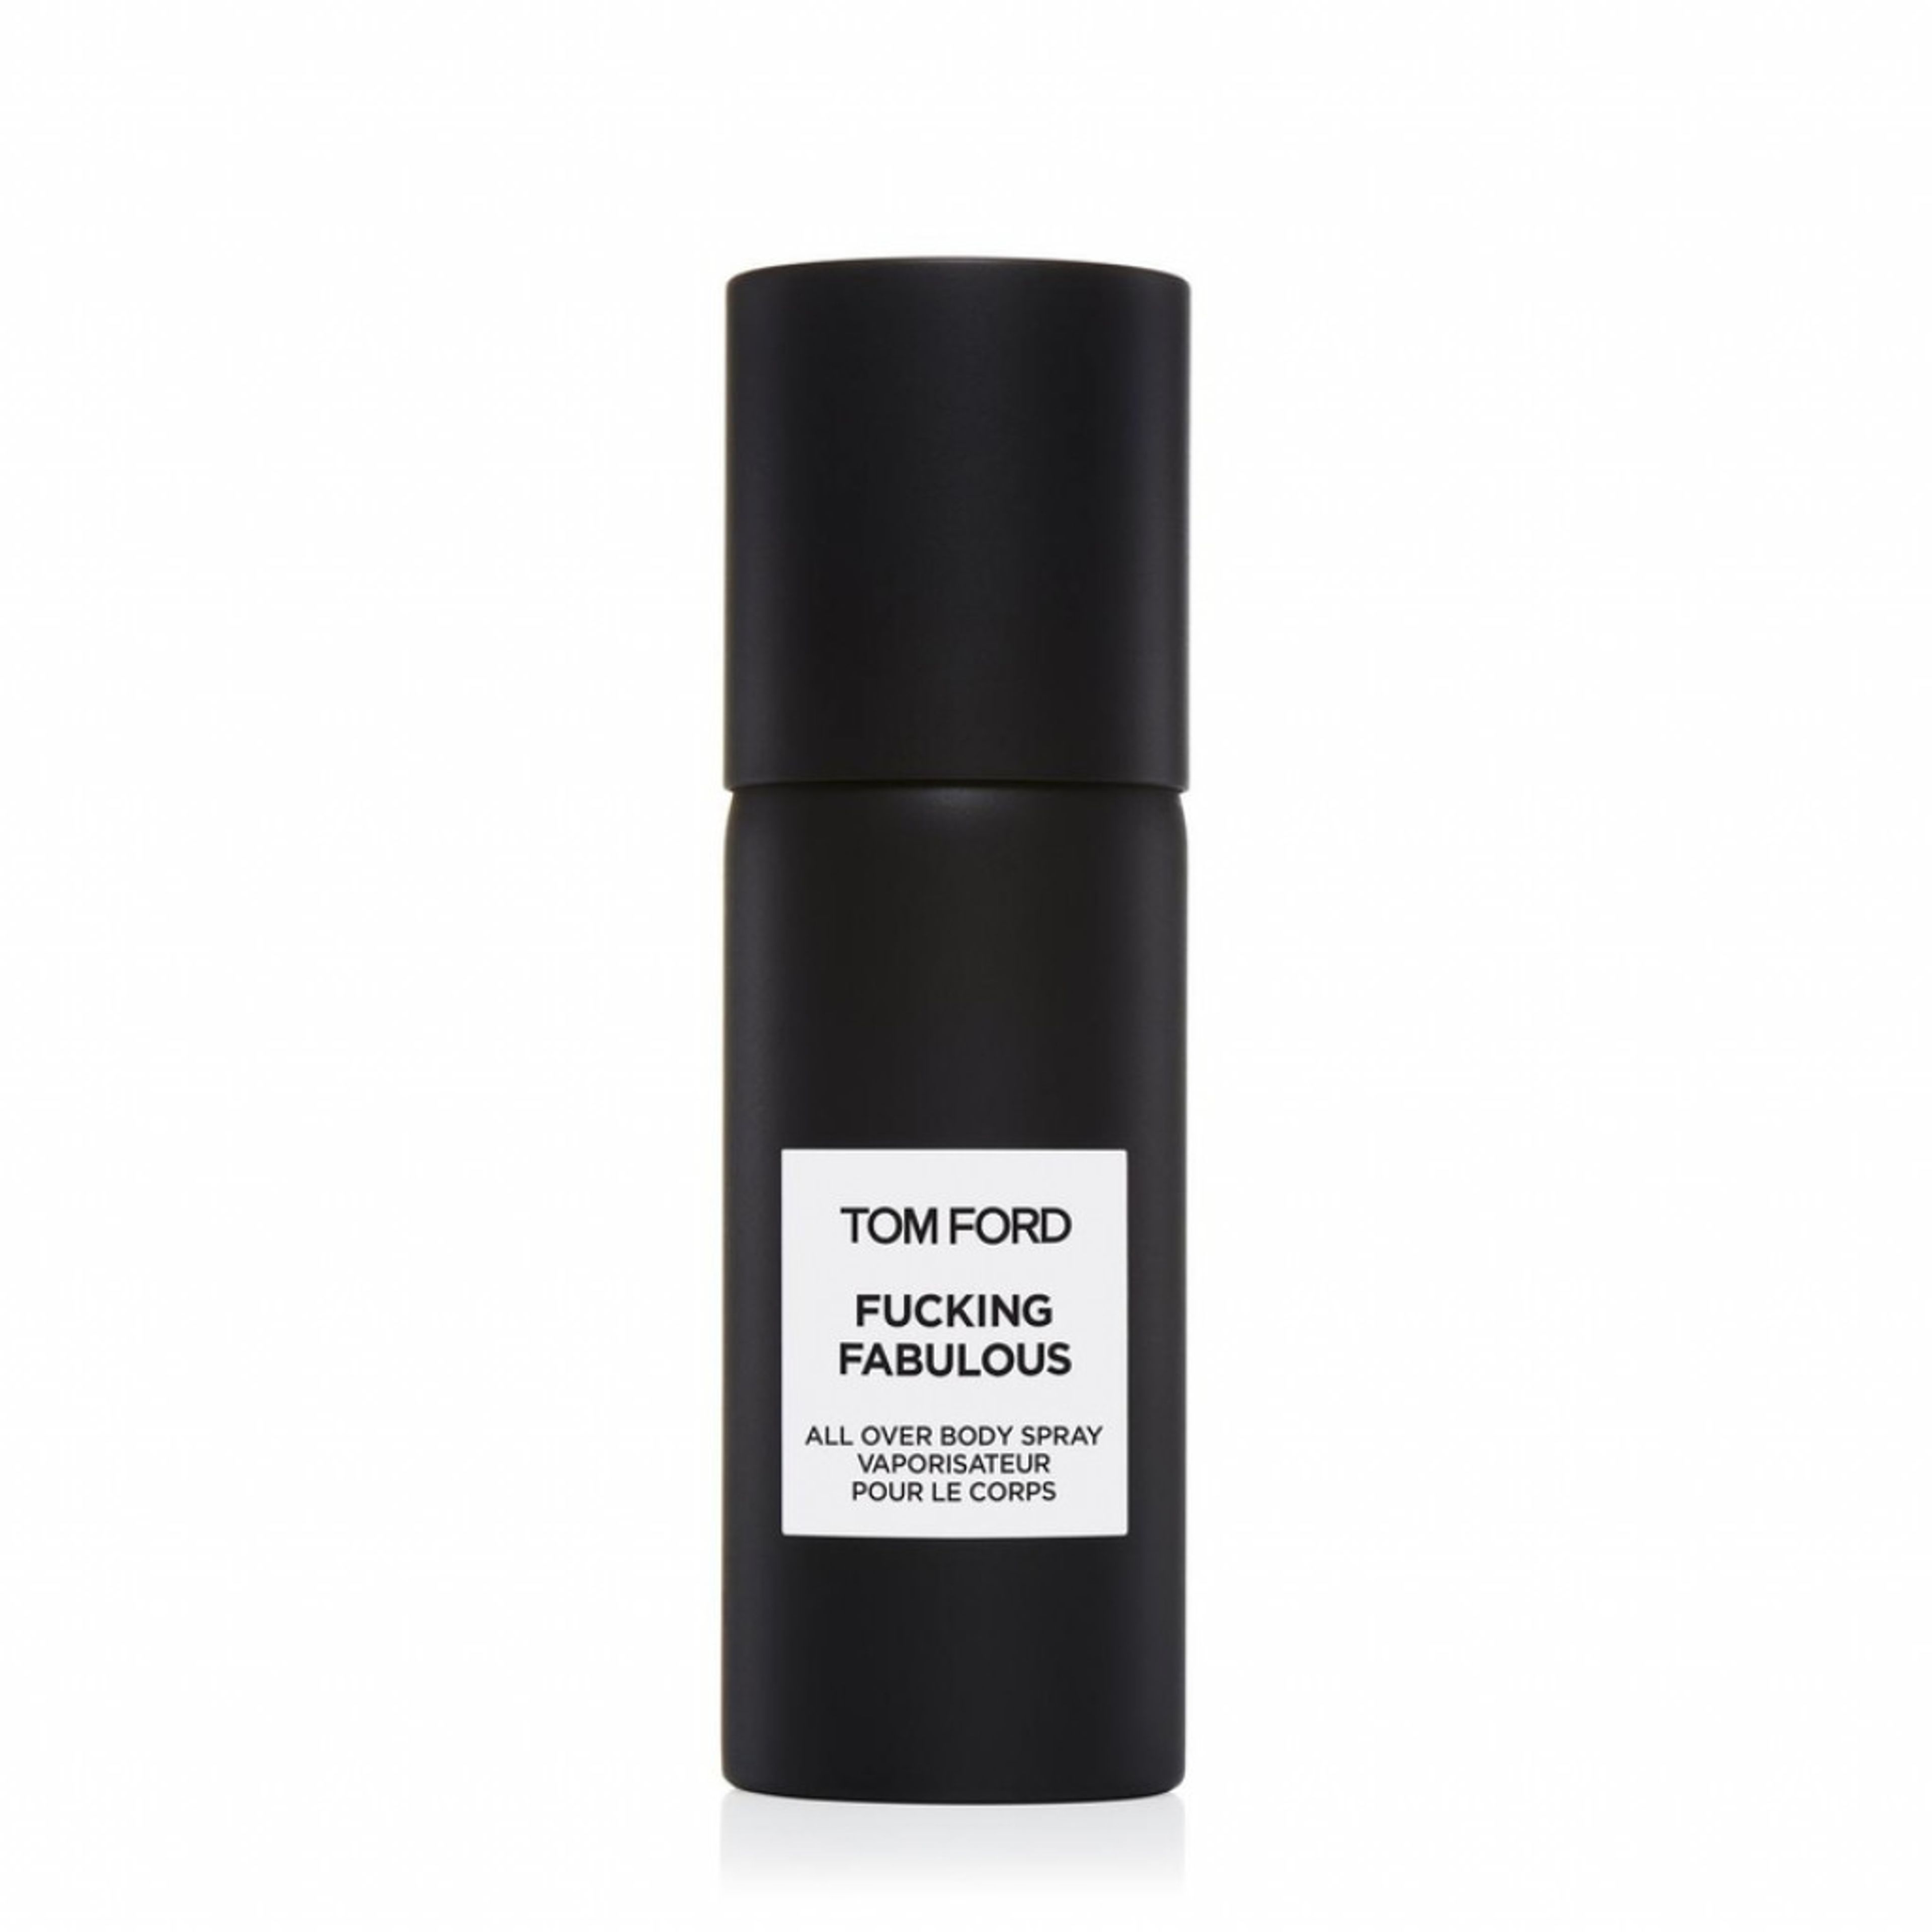 Tom Ford Fucking Fabulous All Over Body Spray 1